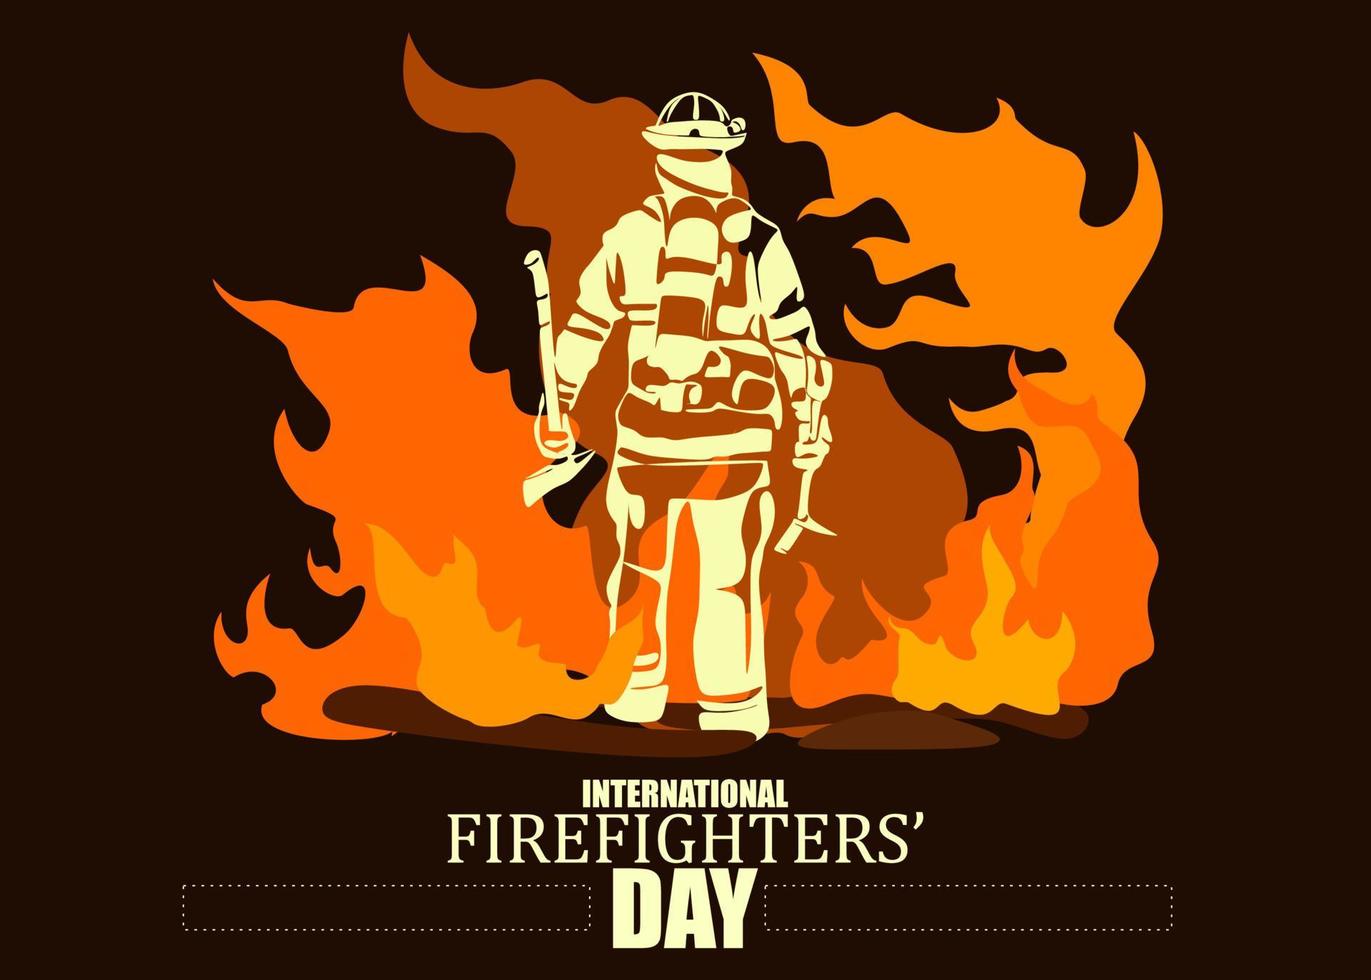 International firefighters day negative space. Firefighter silhouette vector illustration, as a banner, poster or template for international firefighters day with lettering, fire and flames